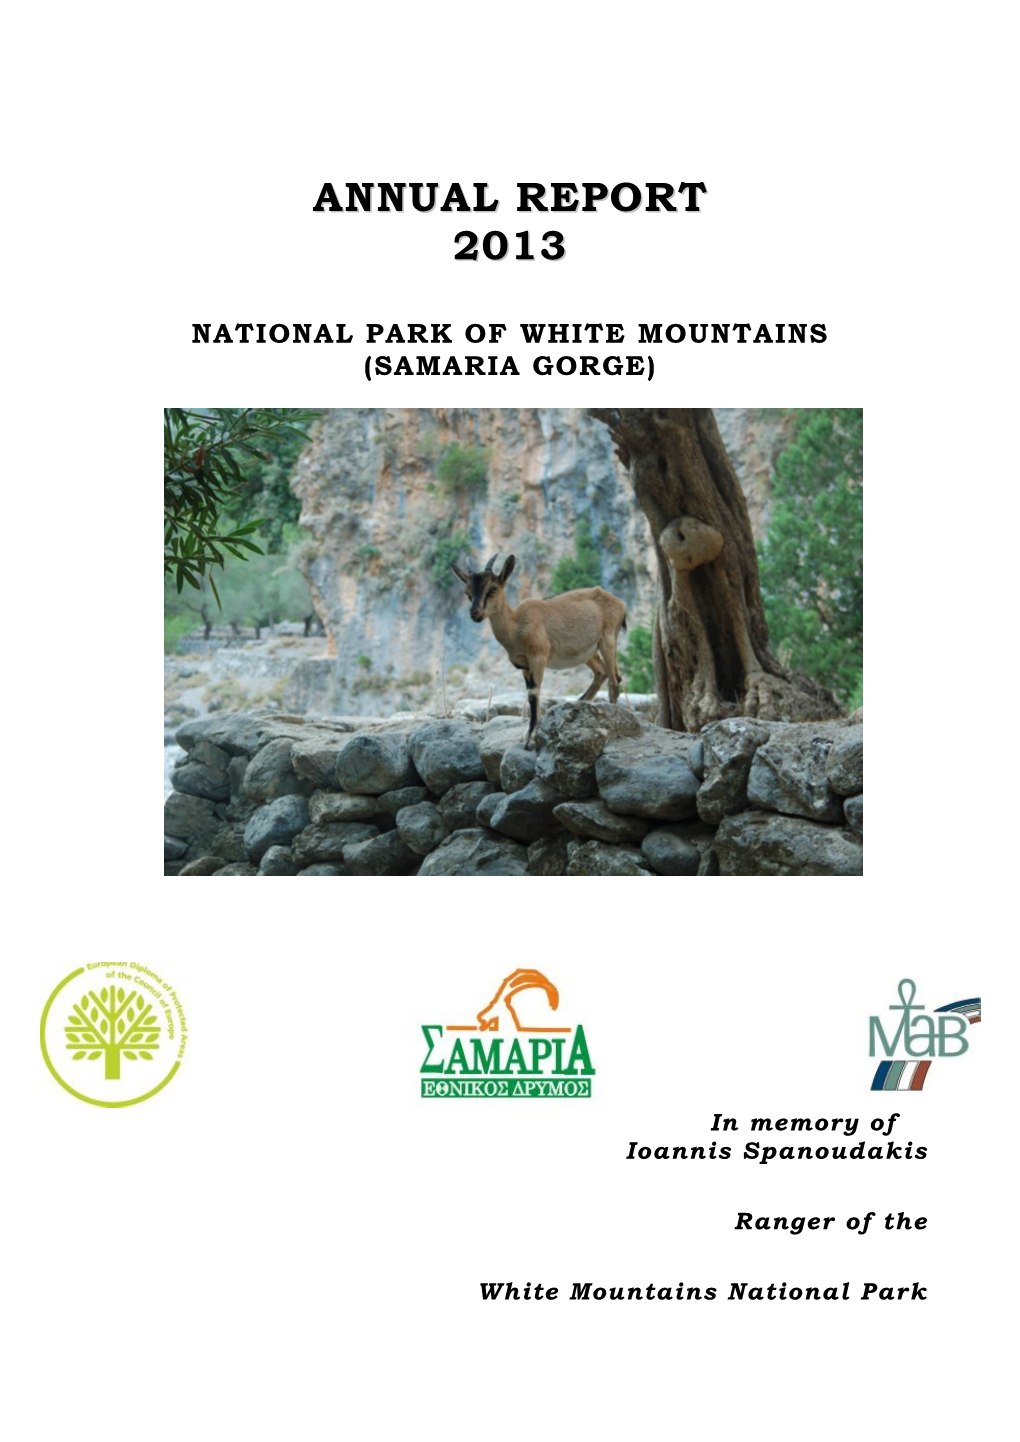 Annual Report (2013) National Park of Samaria